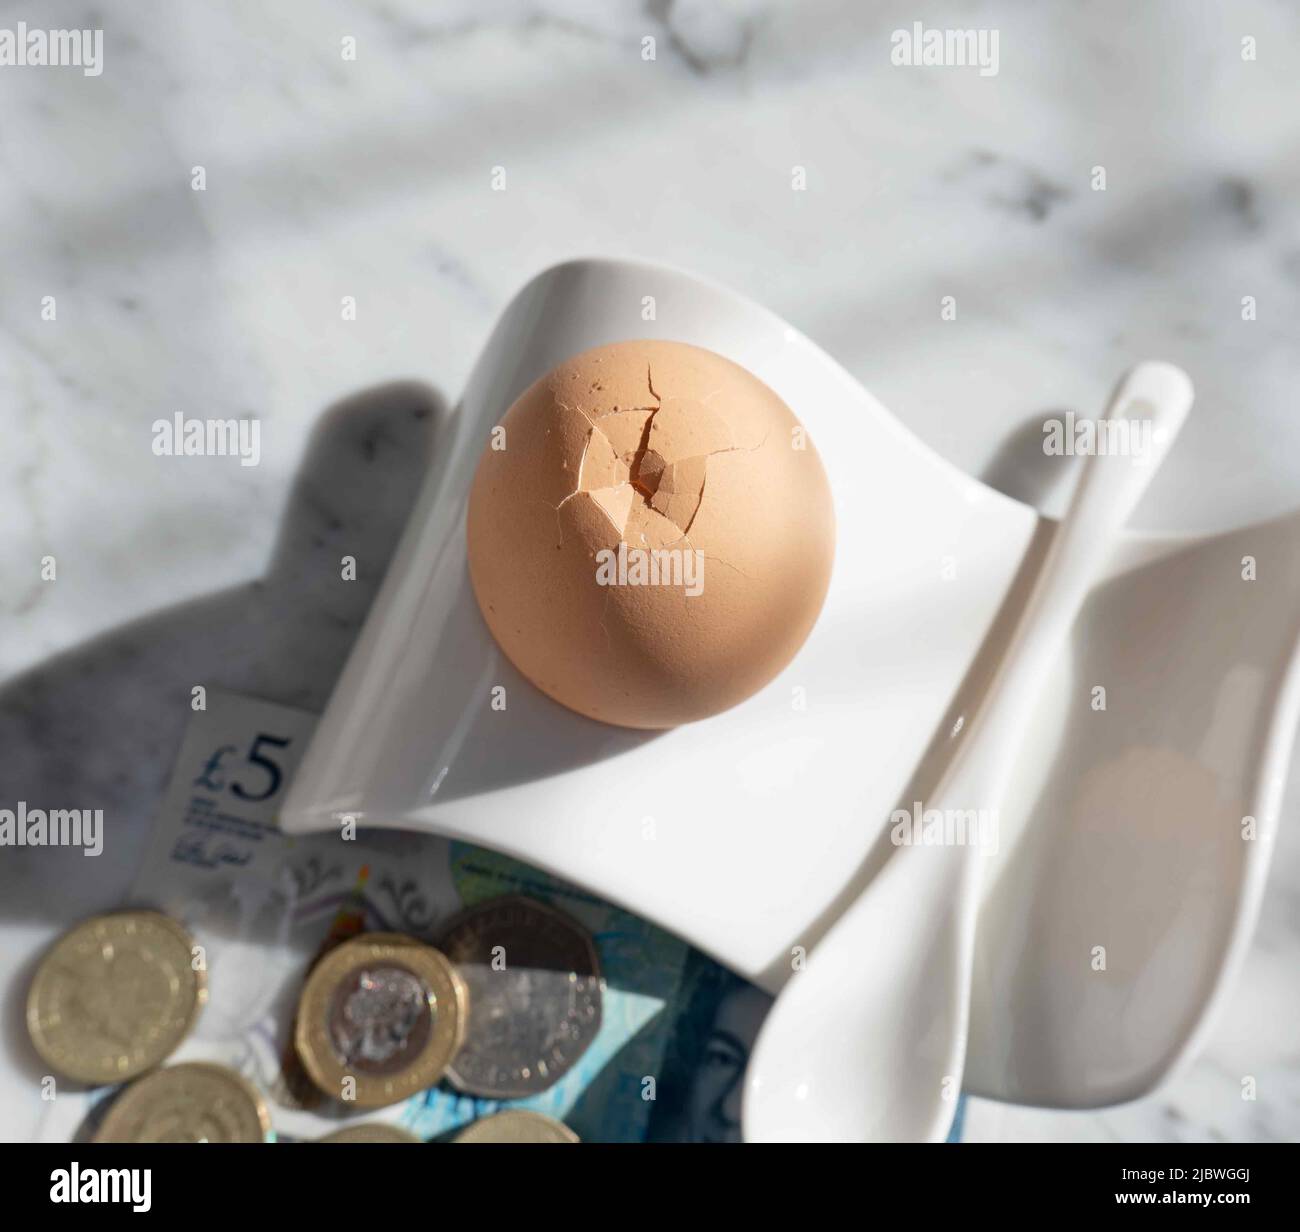 Boiled breakfast egg in an egg cup, five pound banknote and small change in the background. Stock Photo